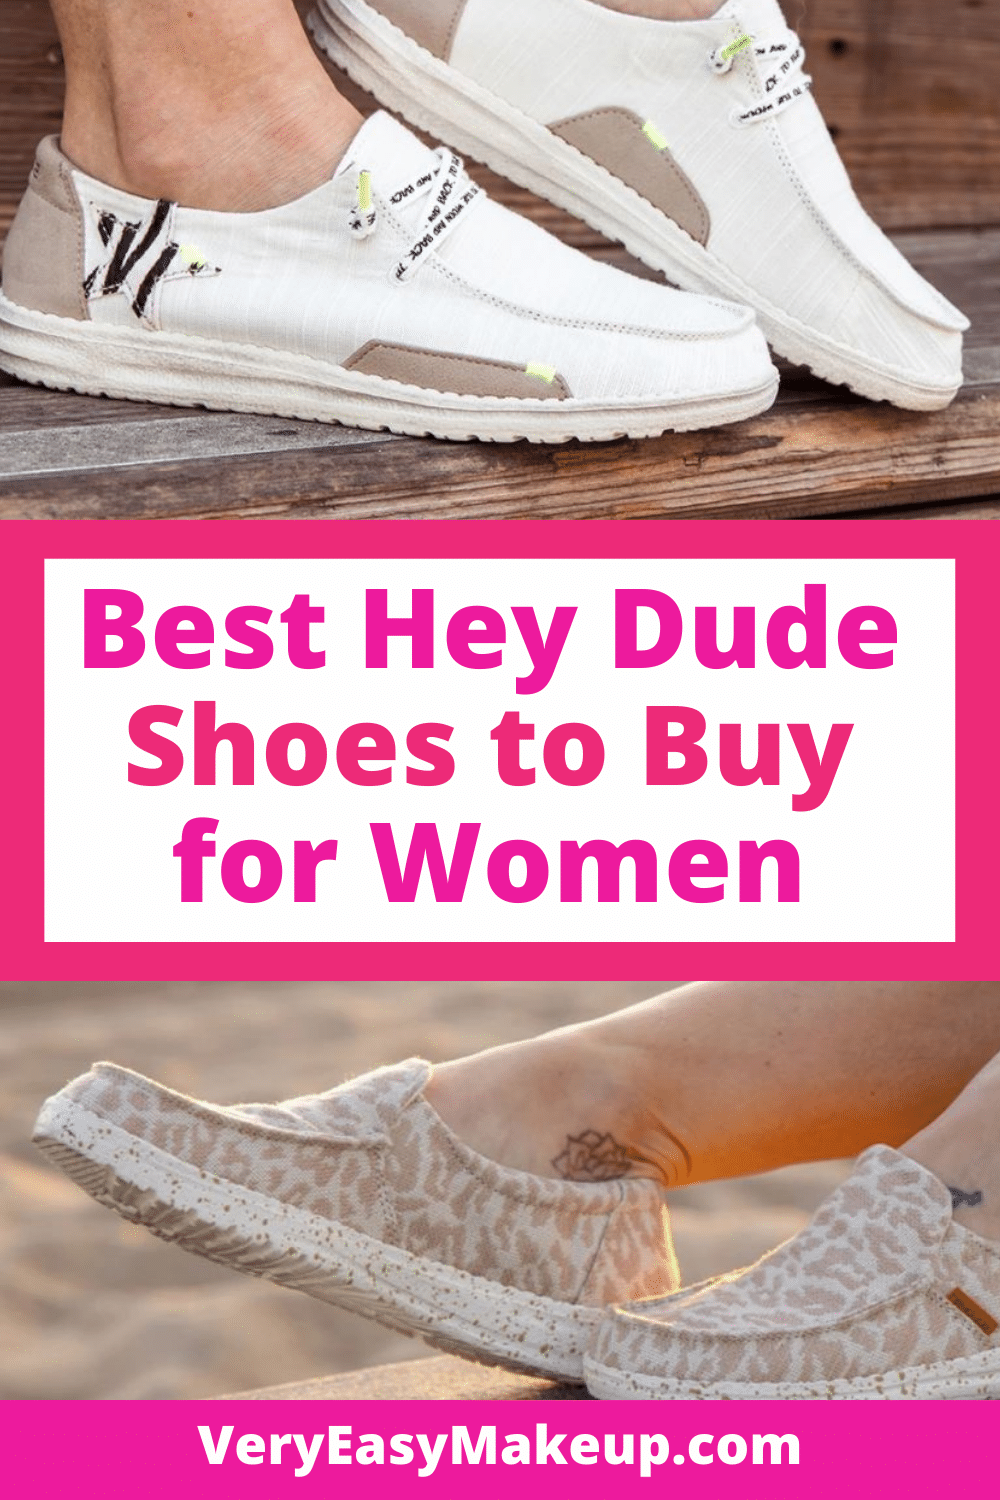 The Best Hey Dude Shoes to Buy and Which Hey Dude Shoes to Buy for Women